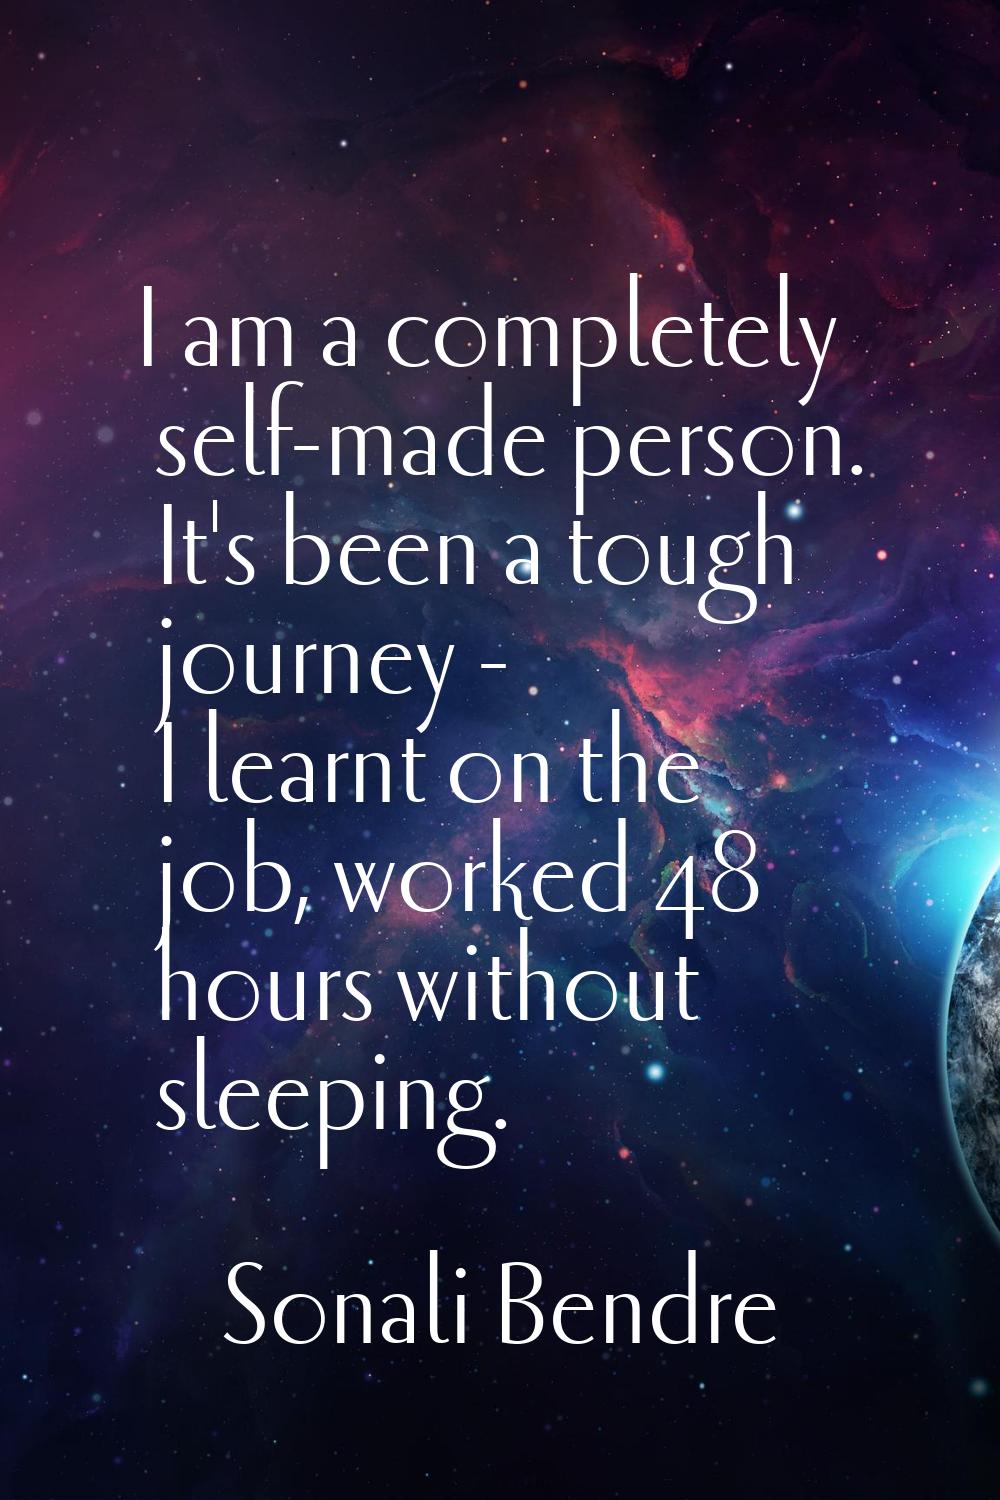 I am a completely self-made person. It's been a tough journey - I learnt on the job, worked 48 hour